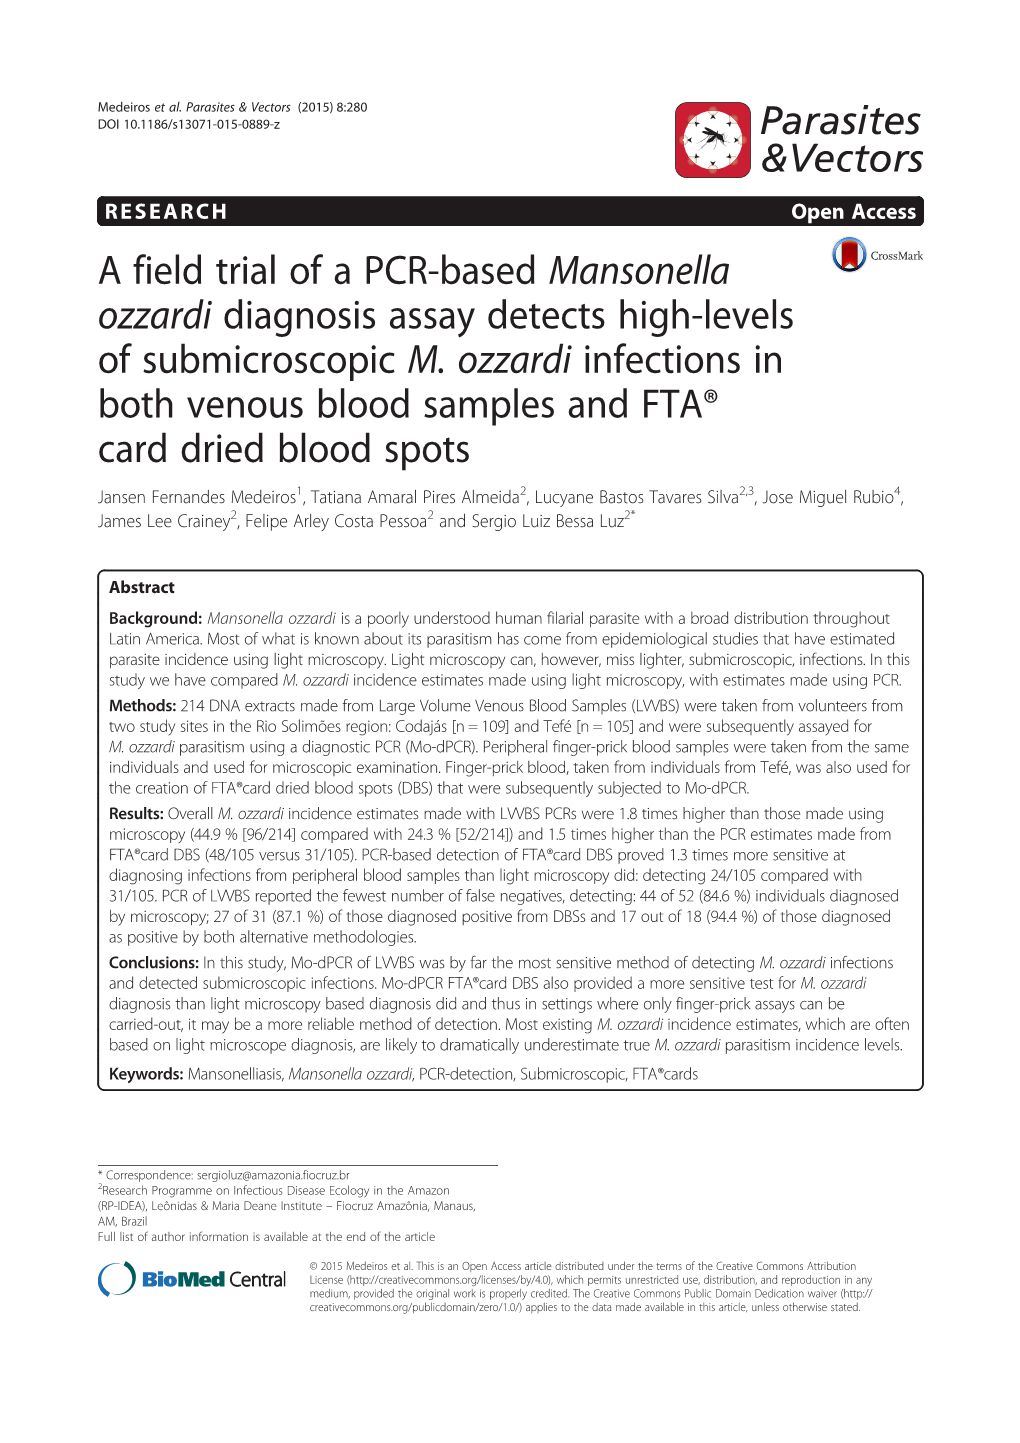 A Field Trial of a PCR-Based Mansonella Ozzardi Diagnosis Assay Detects High-Levels of Submicroscopic M